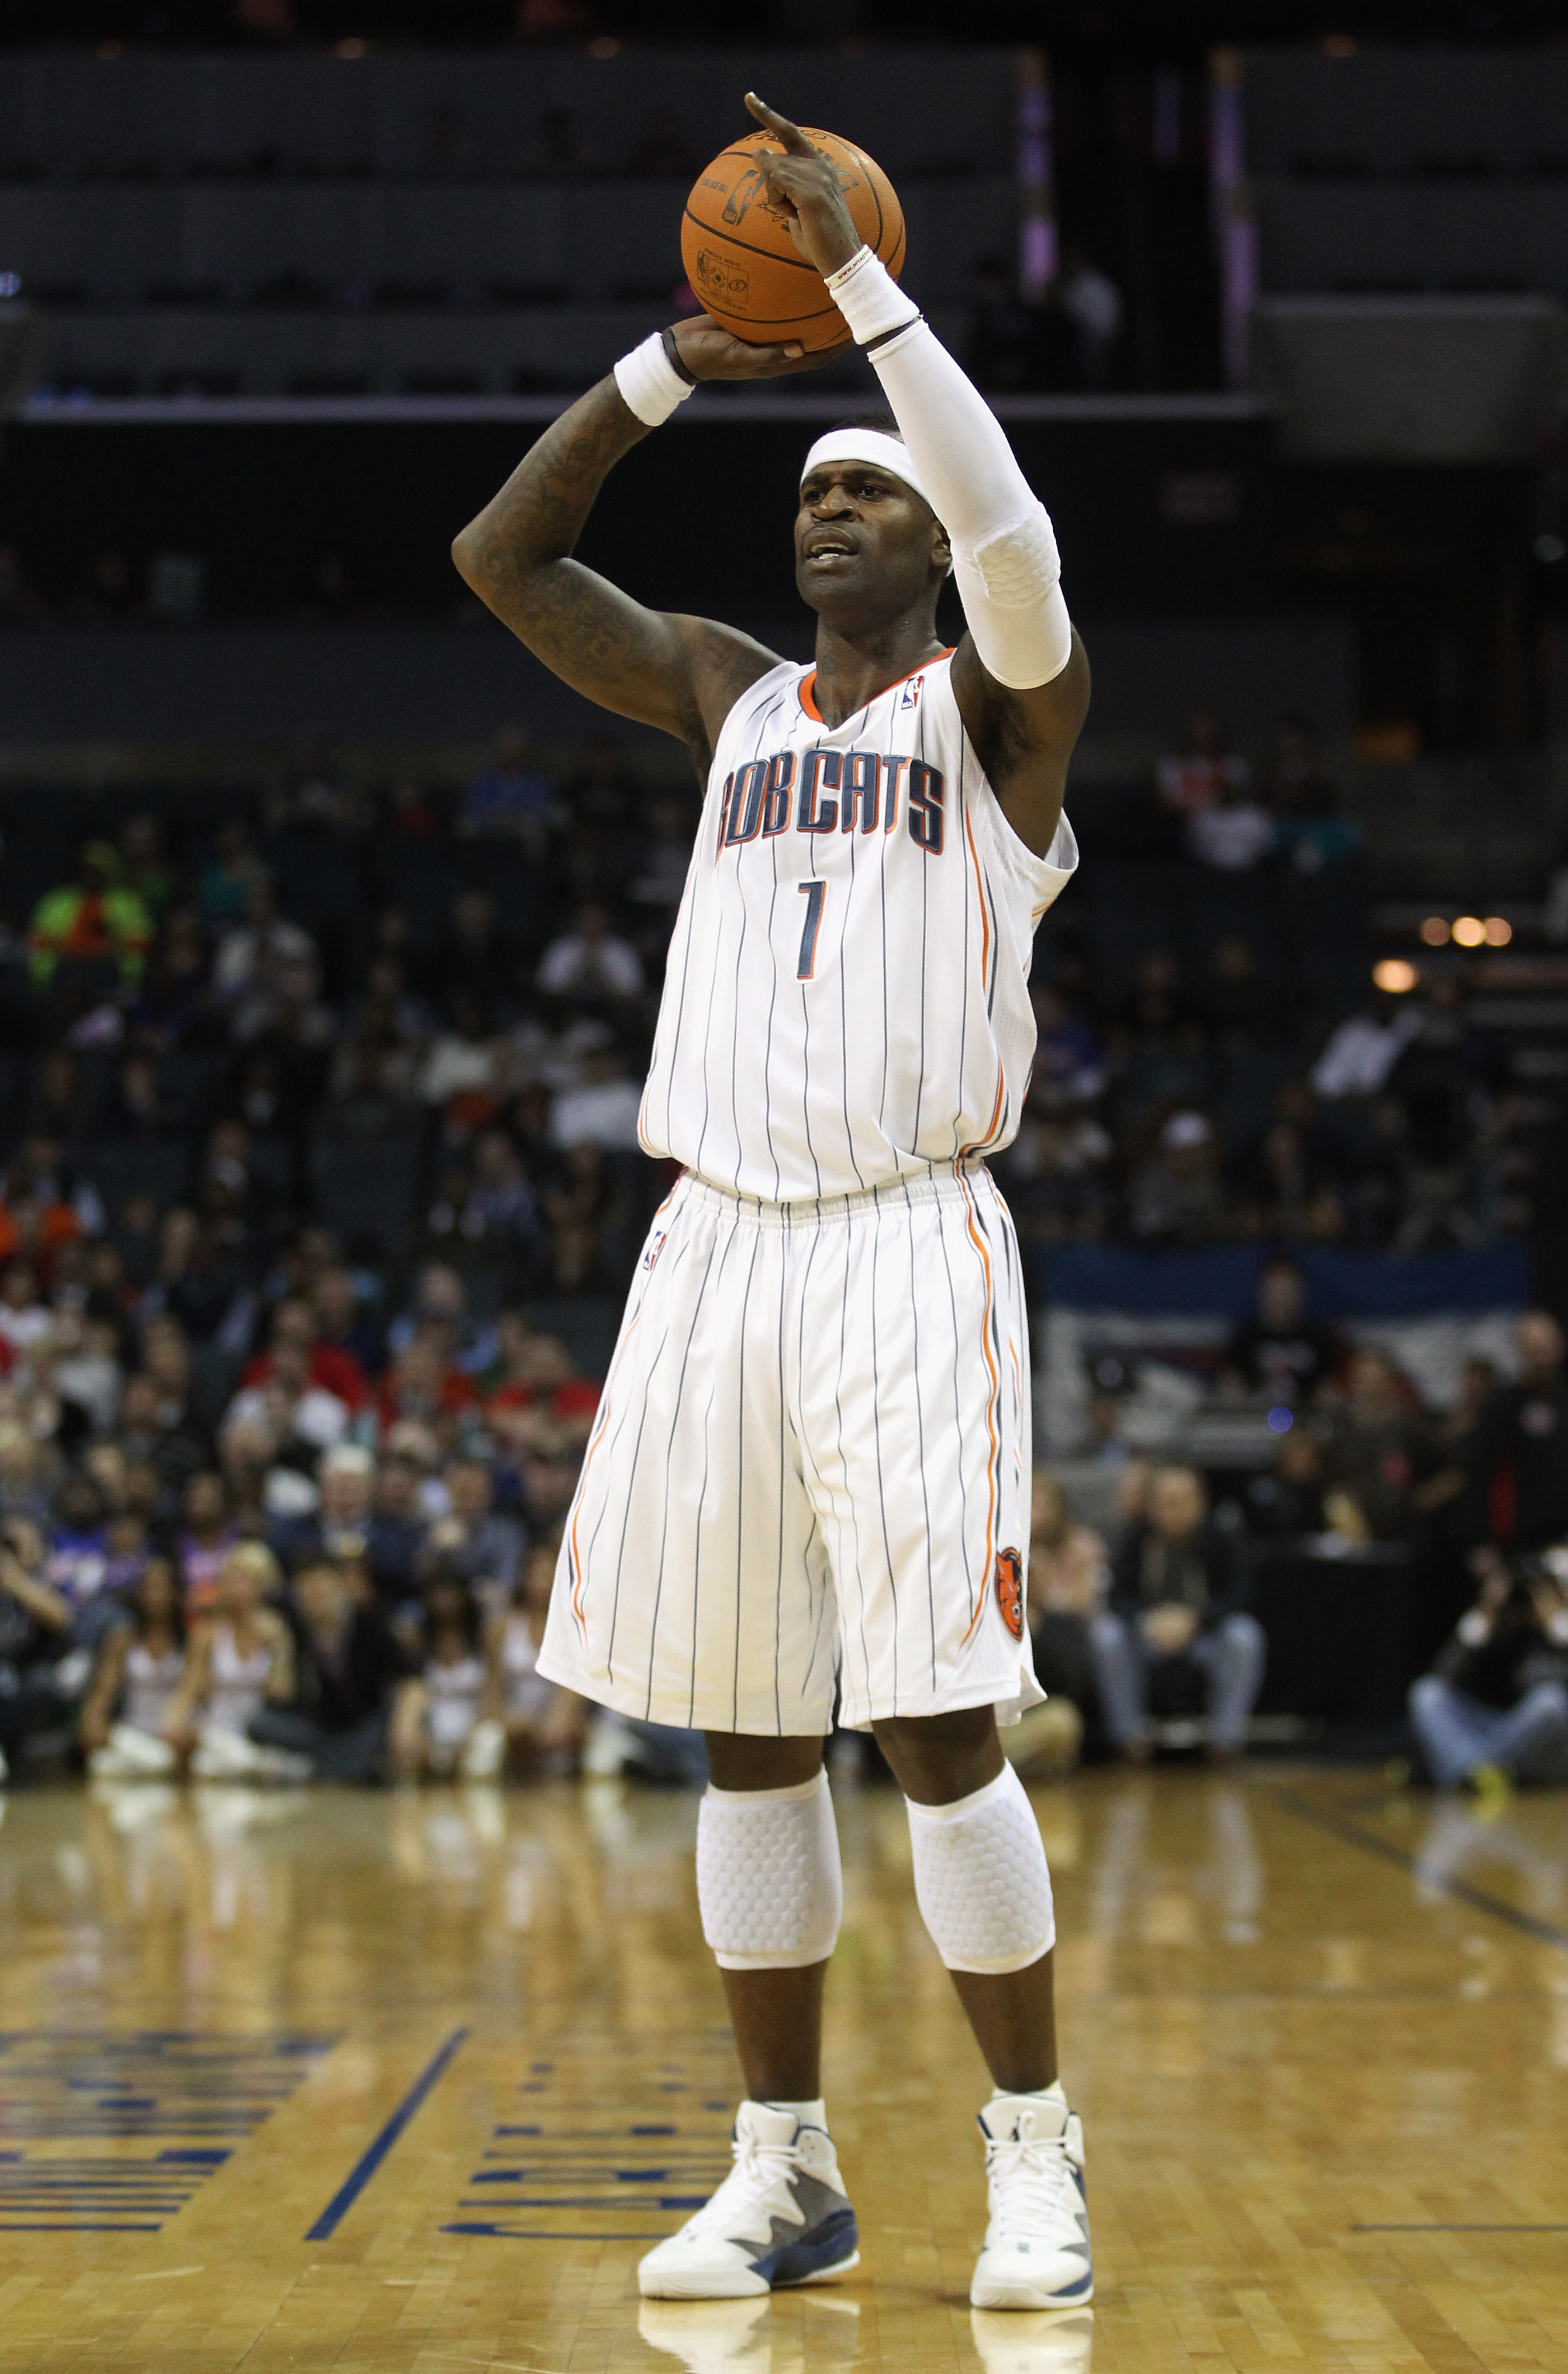 CHARLOTTE, NC - NOVEMBER 24:  Stephen Jackson #1 of the Charlotte Bobcats against the New York Knicks during their game at Time Warner Cable Arena on November 24, 2010 in Charlotte, North Carolina.  NOTE TO USER: User expressly acknowledges and agrees tha